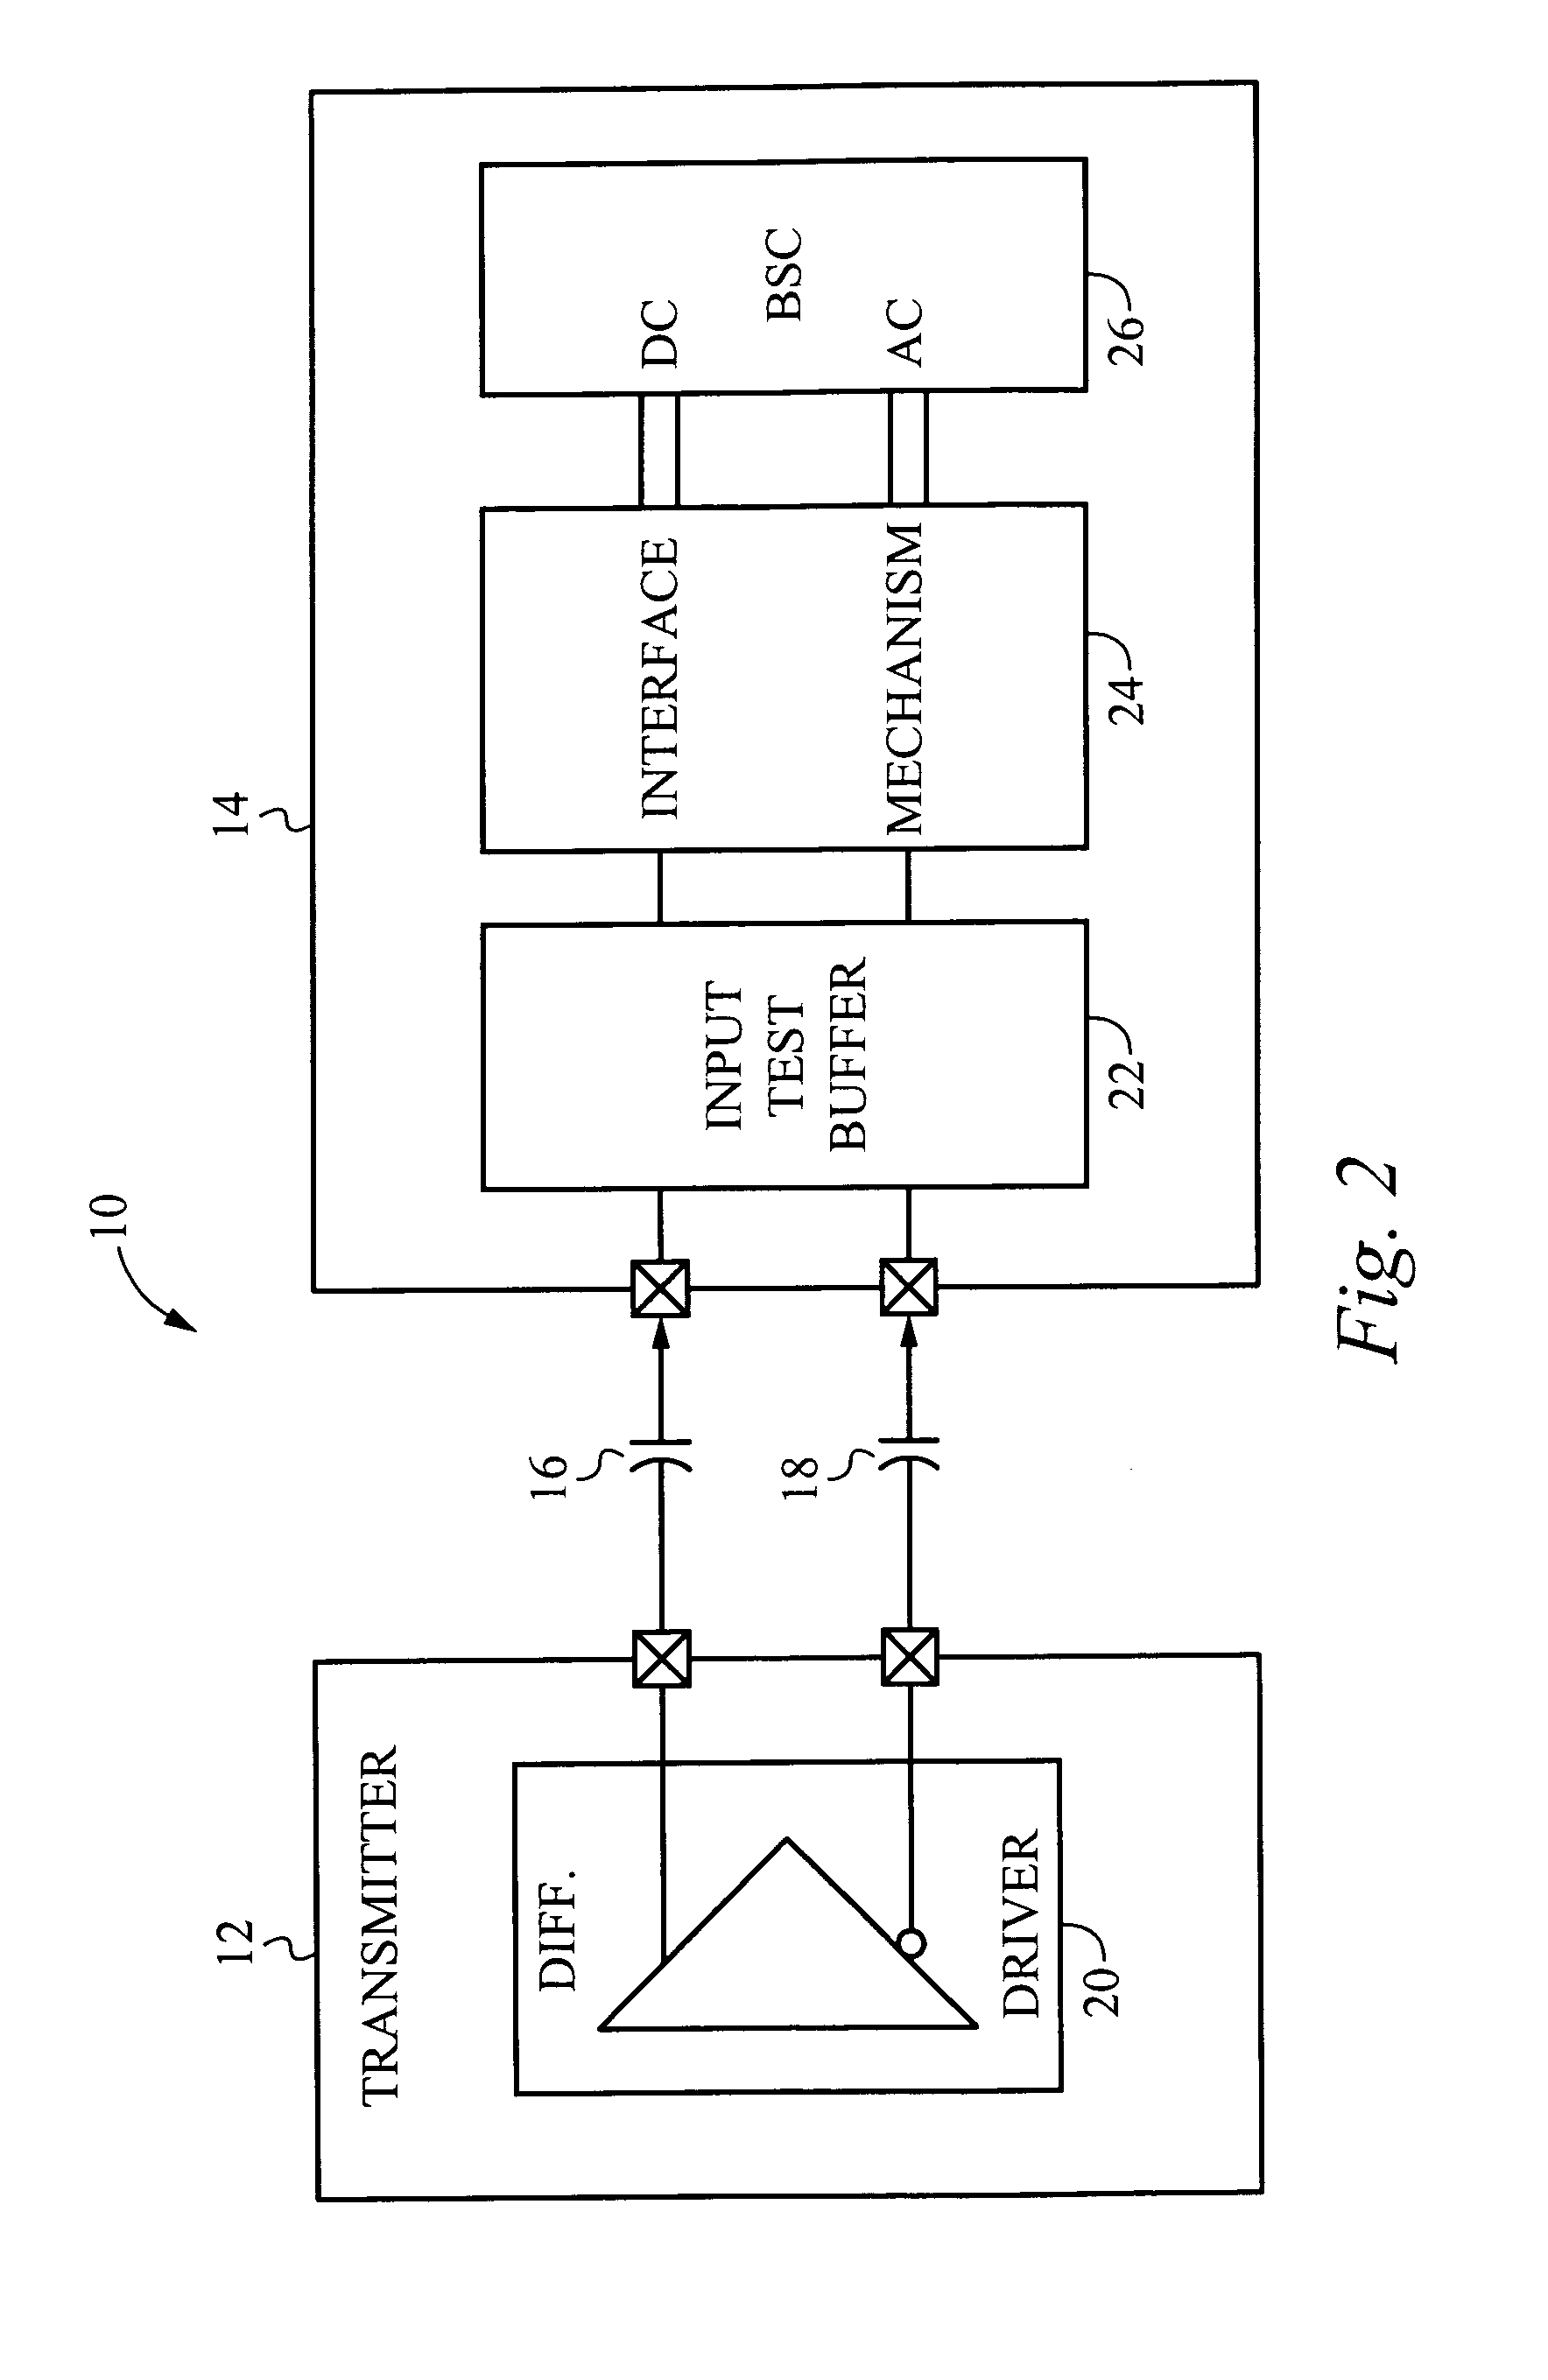 Test buffer design and interface mechanism for differential receiver AC/DC boundary scan test